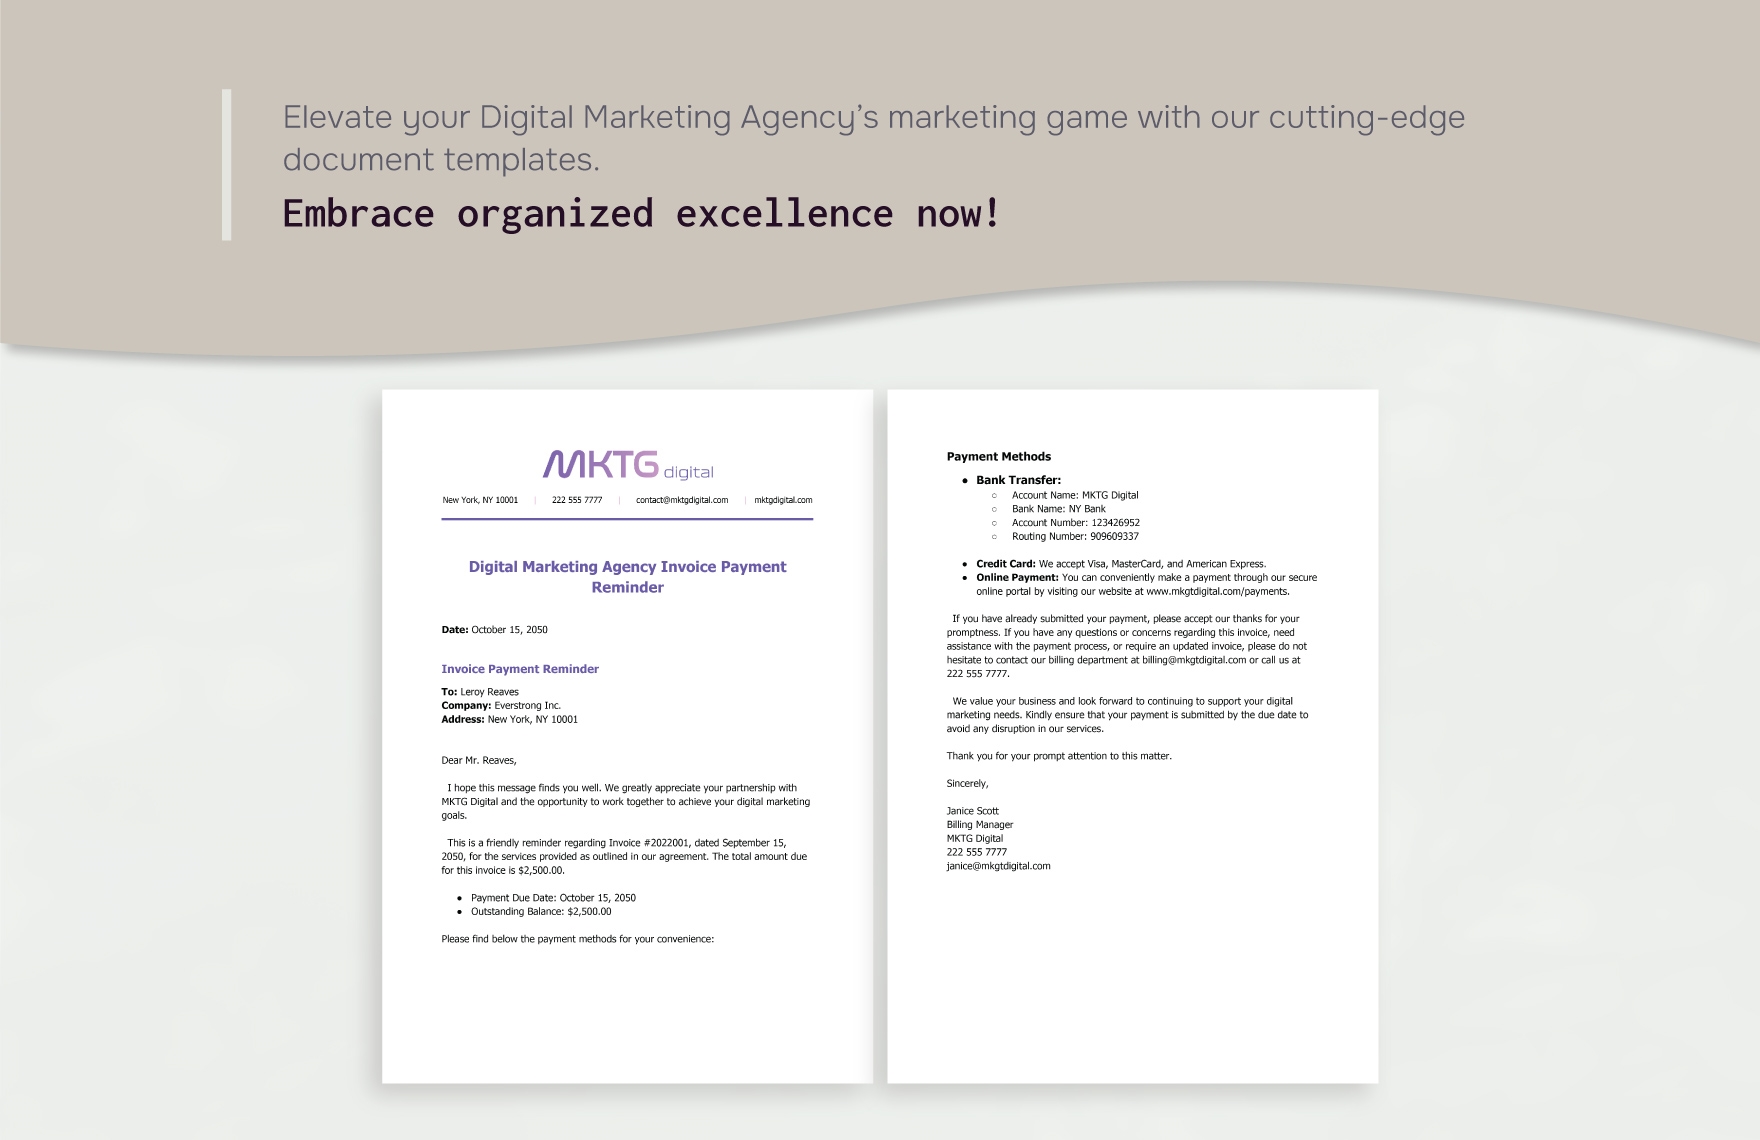 Digital Marketing Agency Invoice Payment Reminder Template